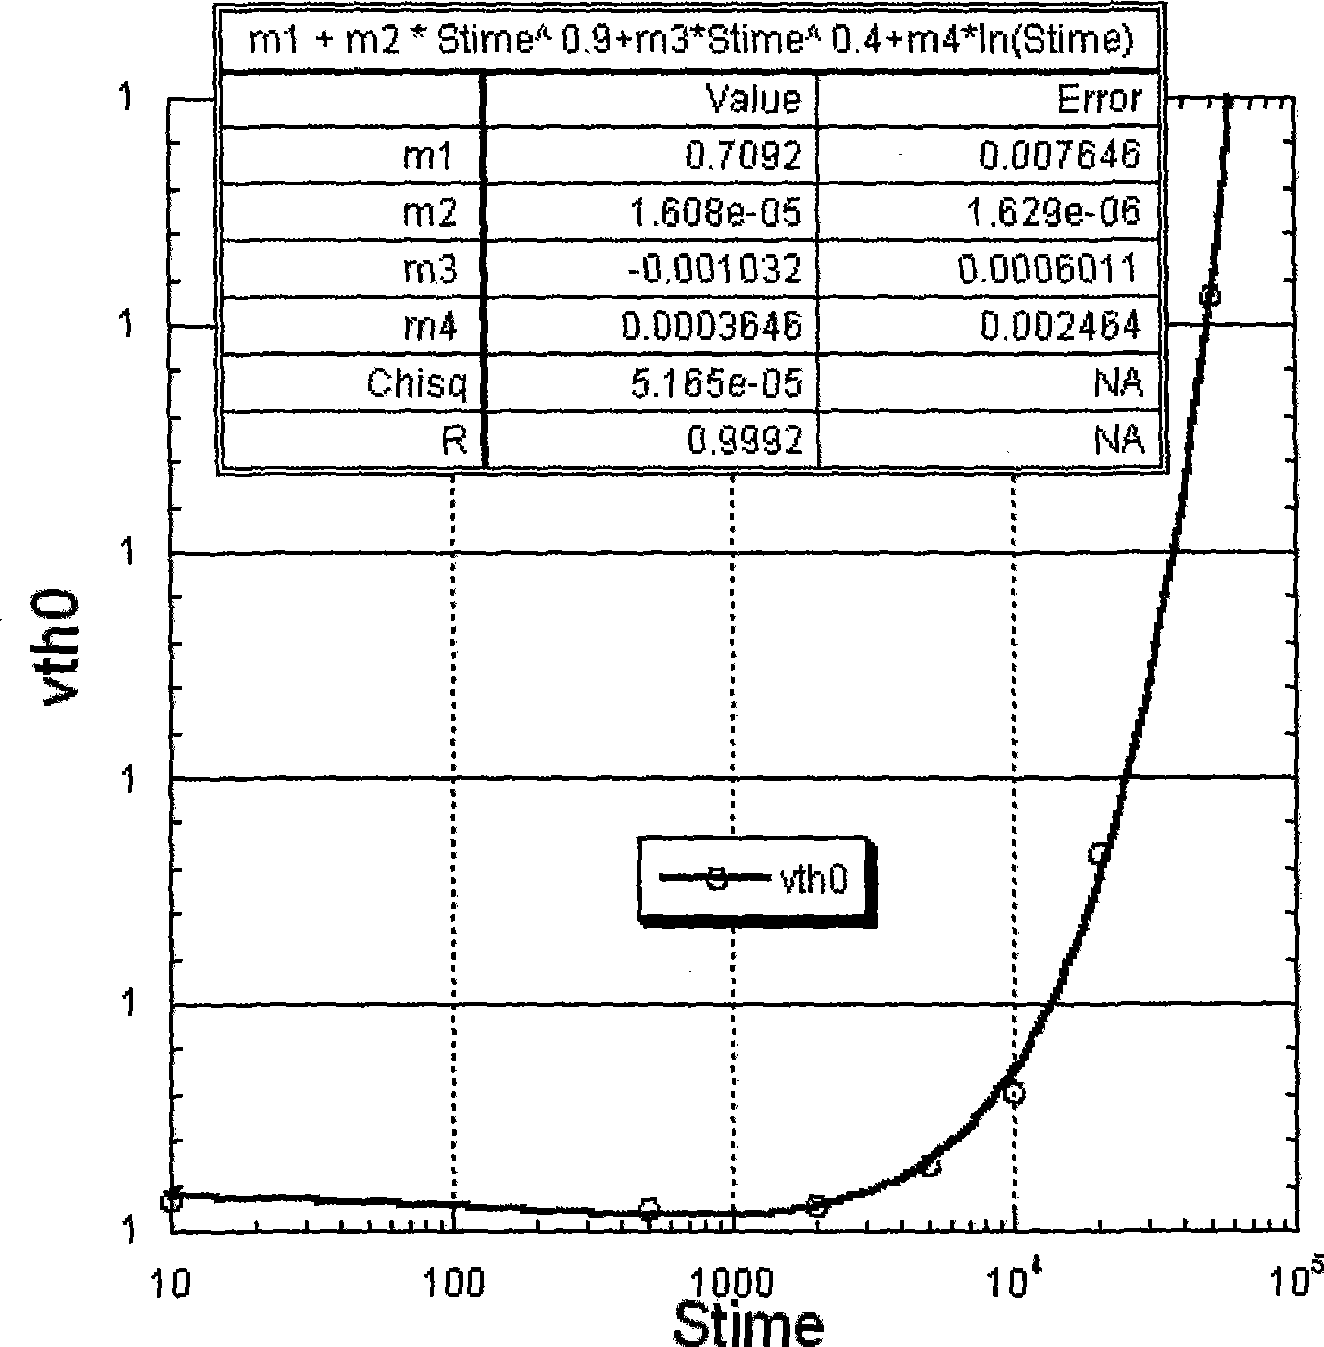 BSIM3 HCI reliability model used in MOSFET electrical simulation